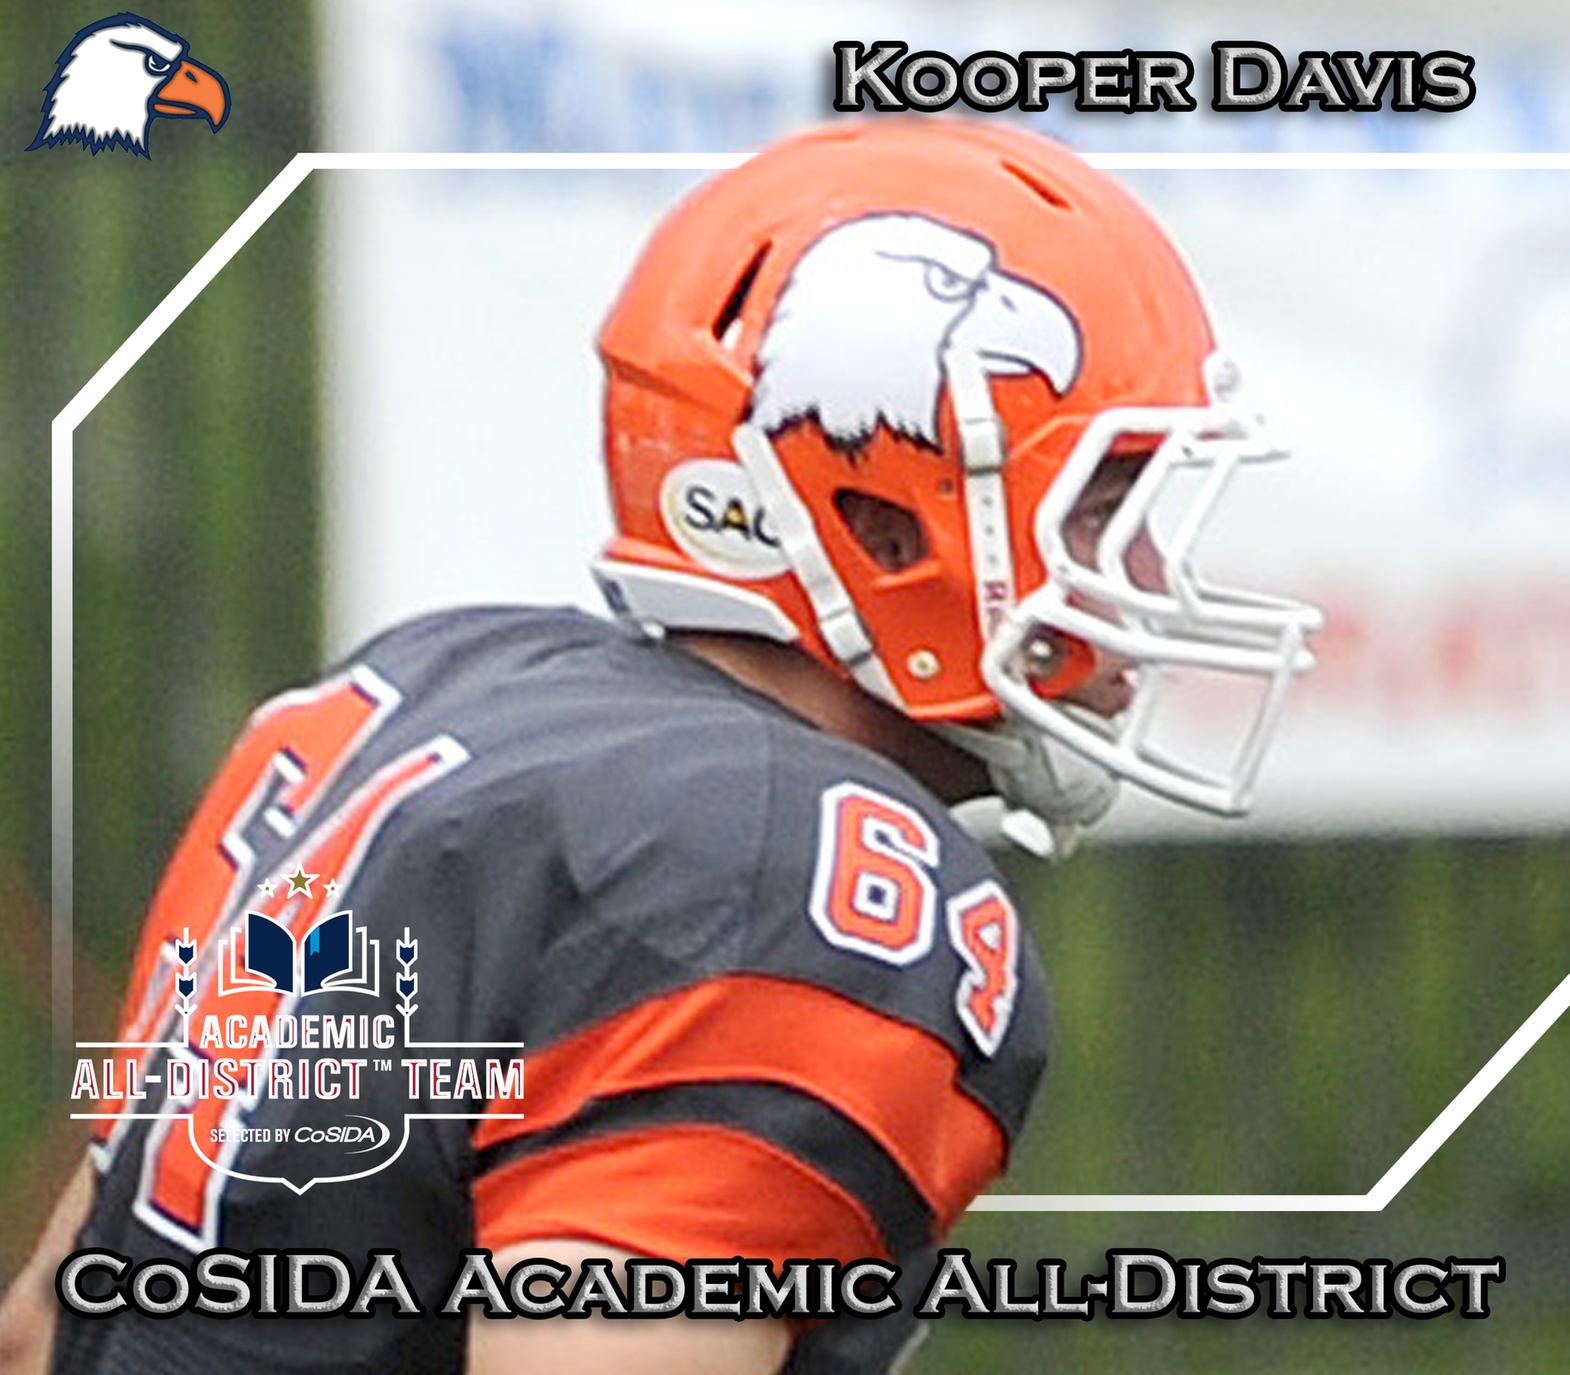 Four Eagles net CoSIDA Academic All-District honors